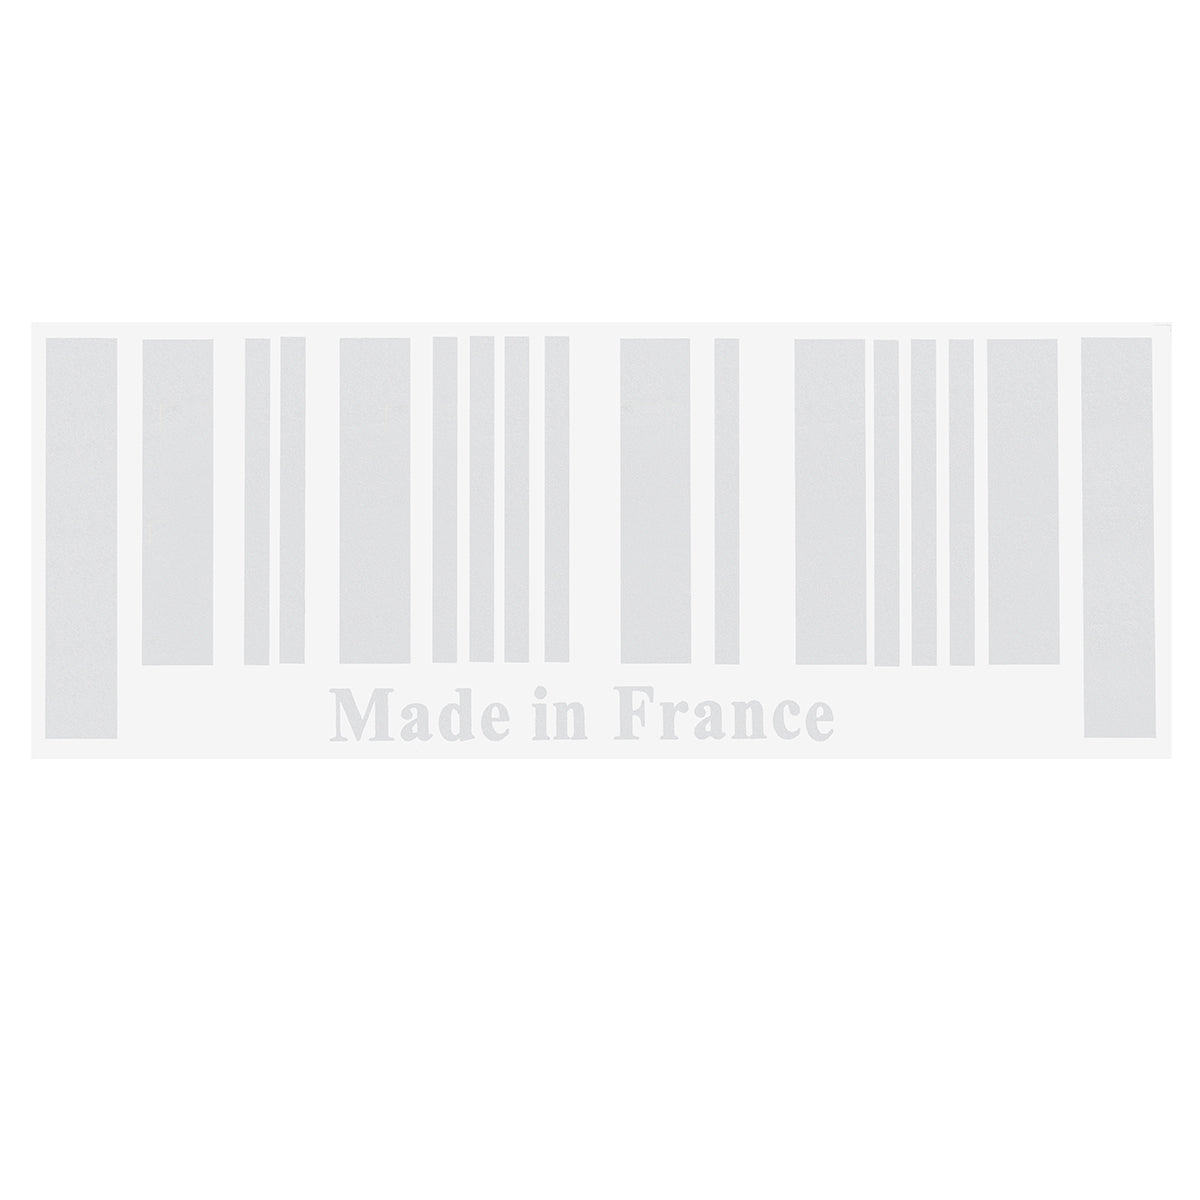 Lavender 25x9cm PVC Car Made In France Bar Code Stickers Graphic Decal Decoration Universal